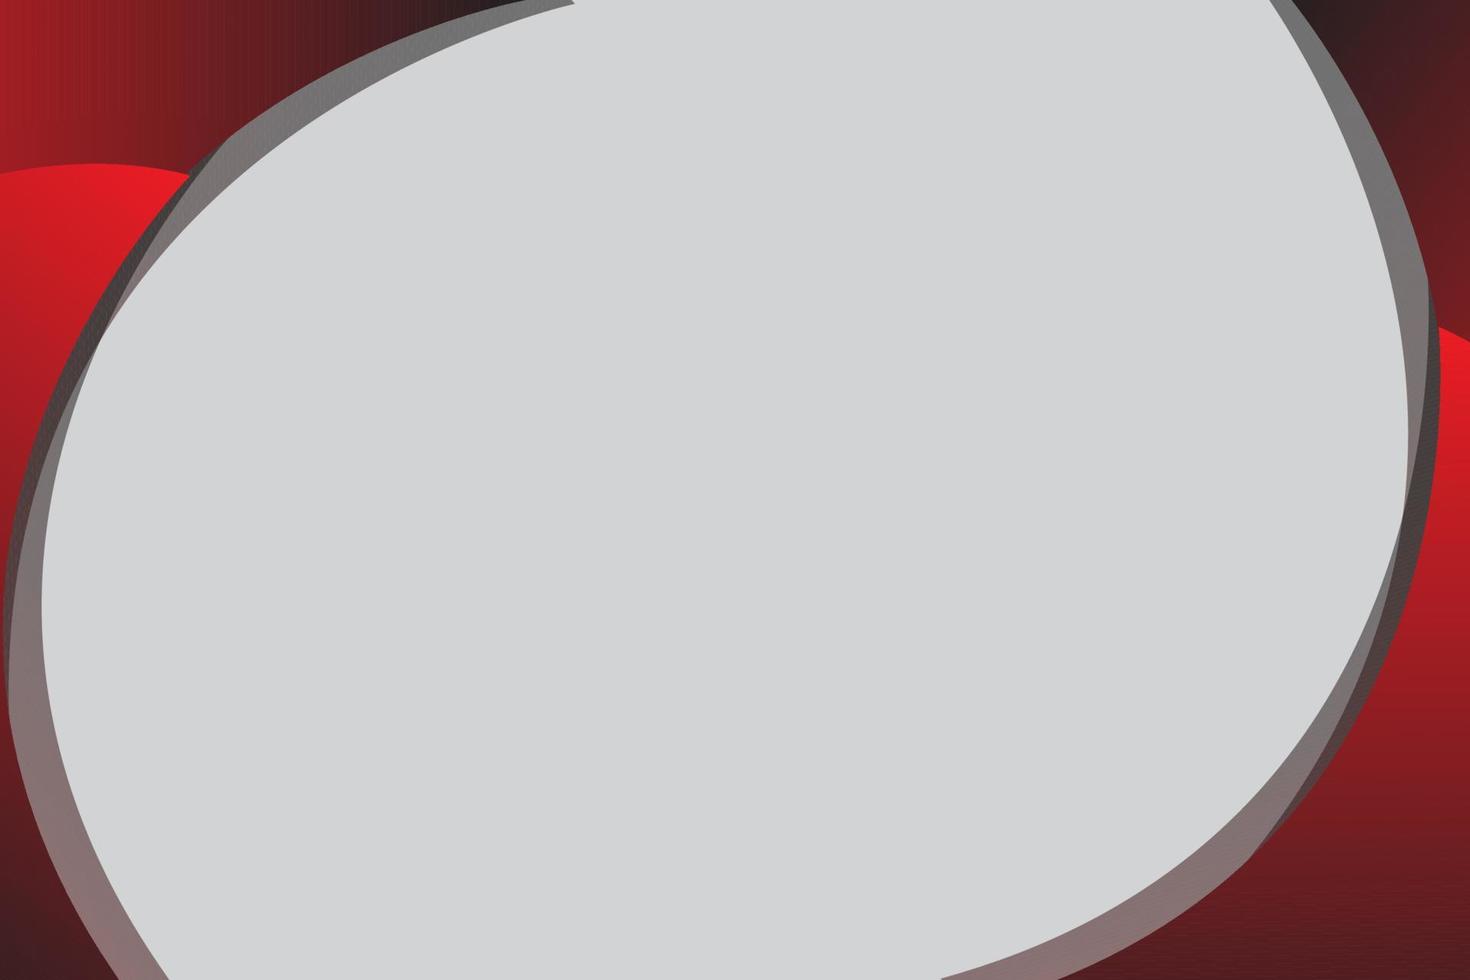 curved red frame background. circle curved frame vector, shadow, coping space vector